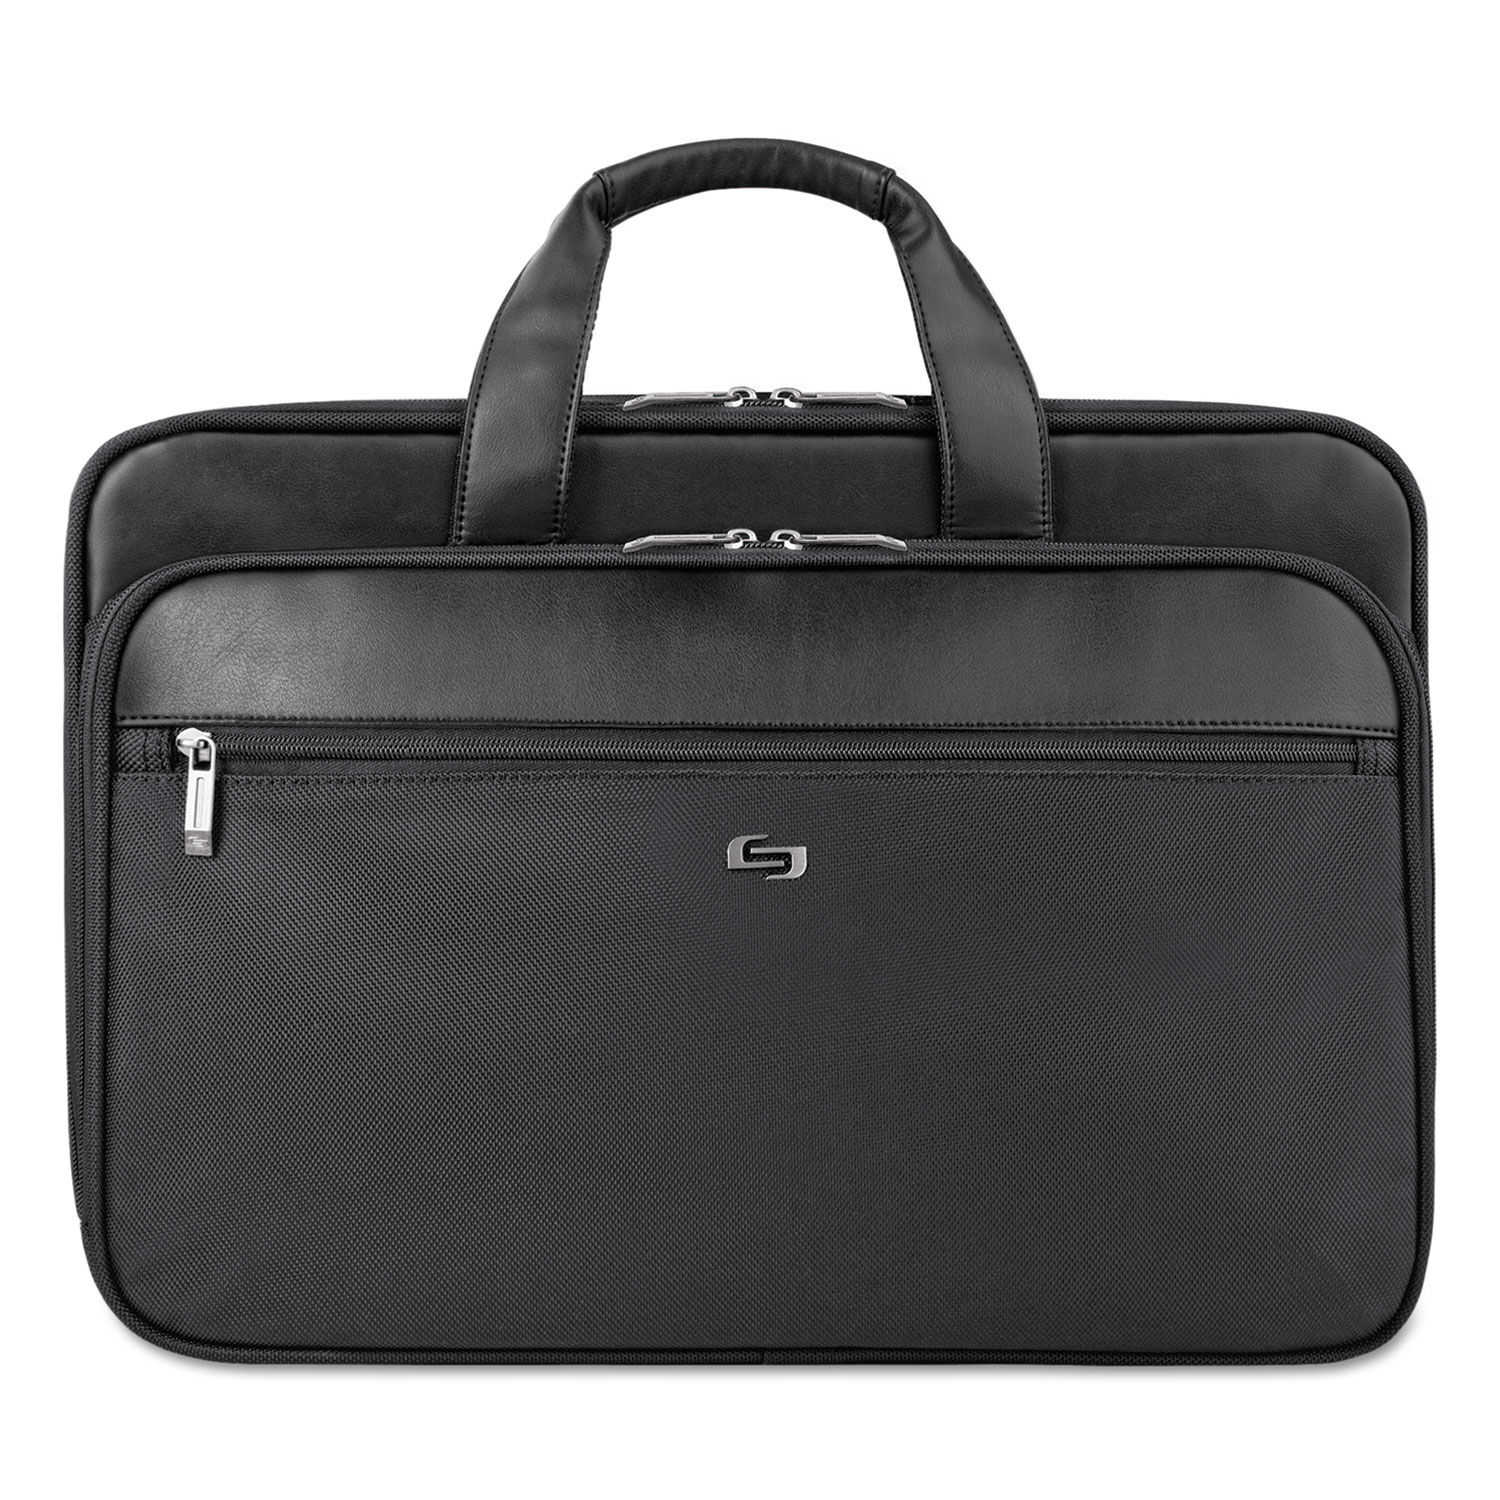 Classic Smart Strap Briefcase Fits Devices Up to 16", Ballistic Polyester, 17.5 x 5.5 x 12, Black